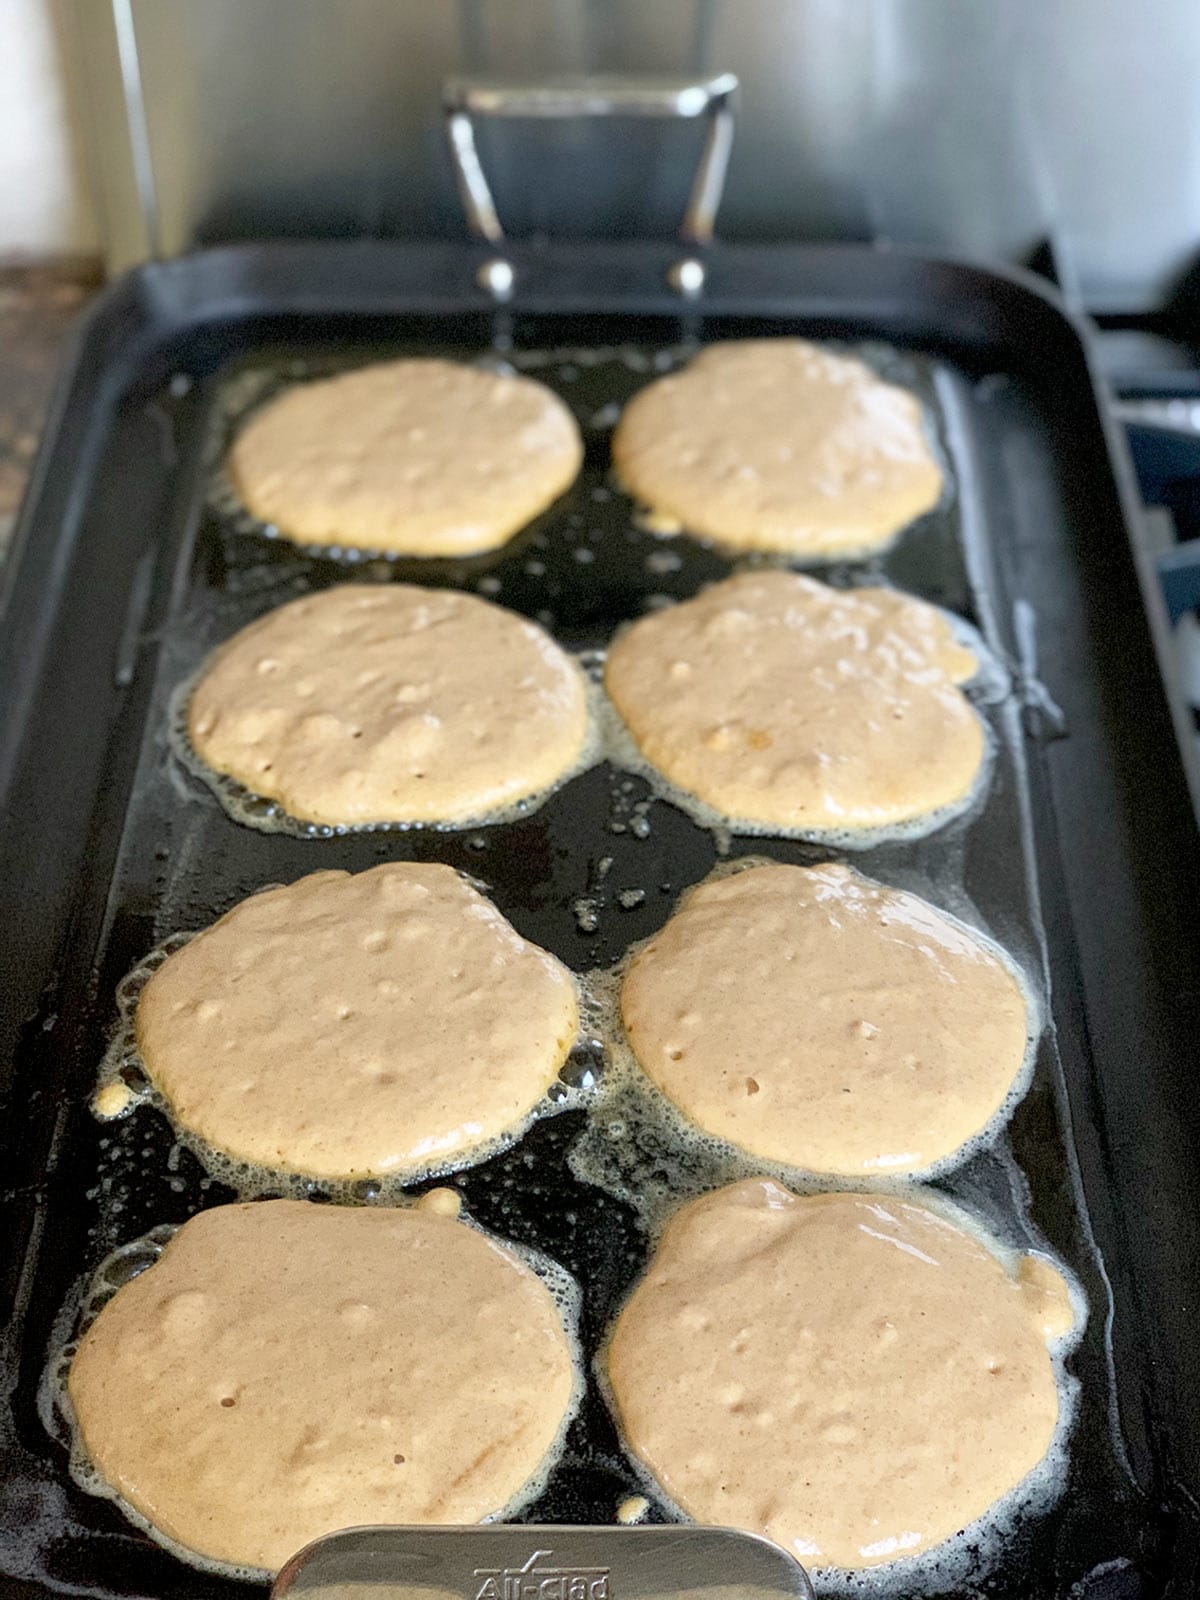 Pancakes cooking on griddle before being flipped.